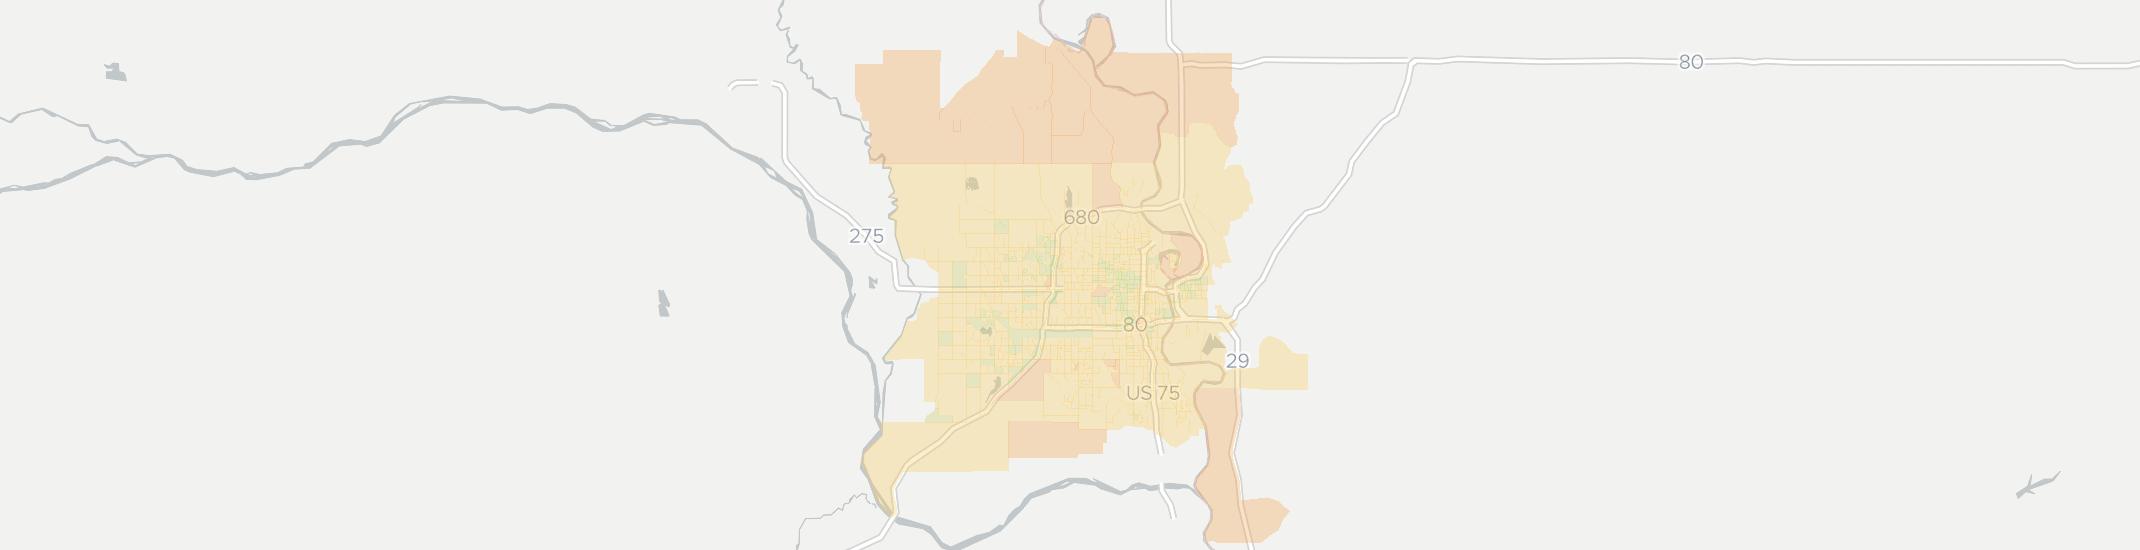 Omaha Internet Competition Map. Click for interactive map